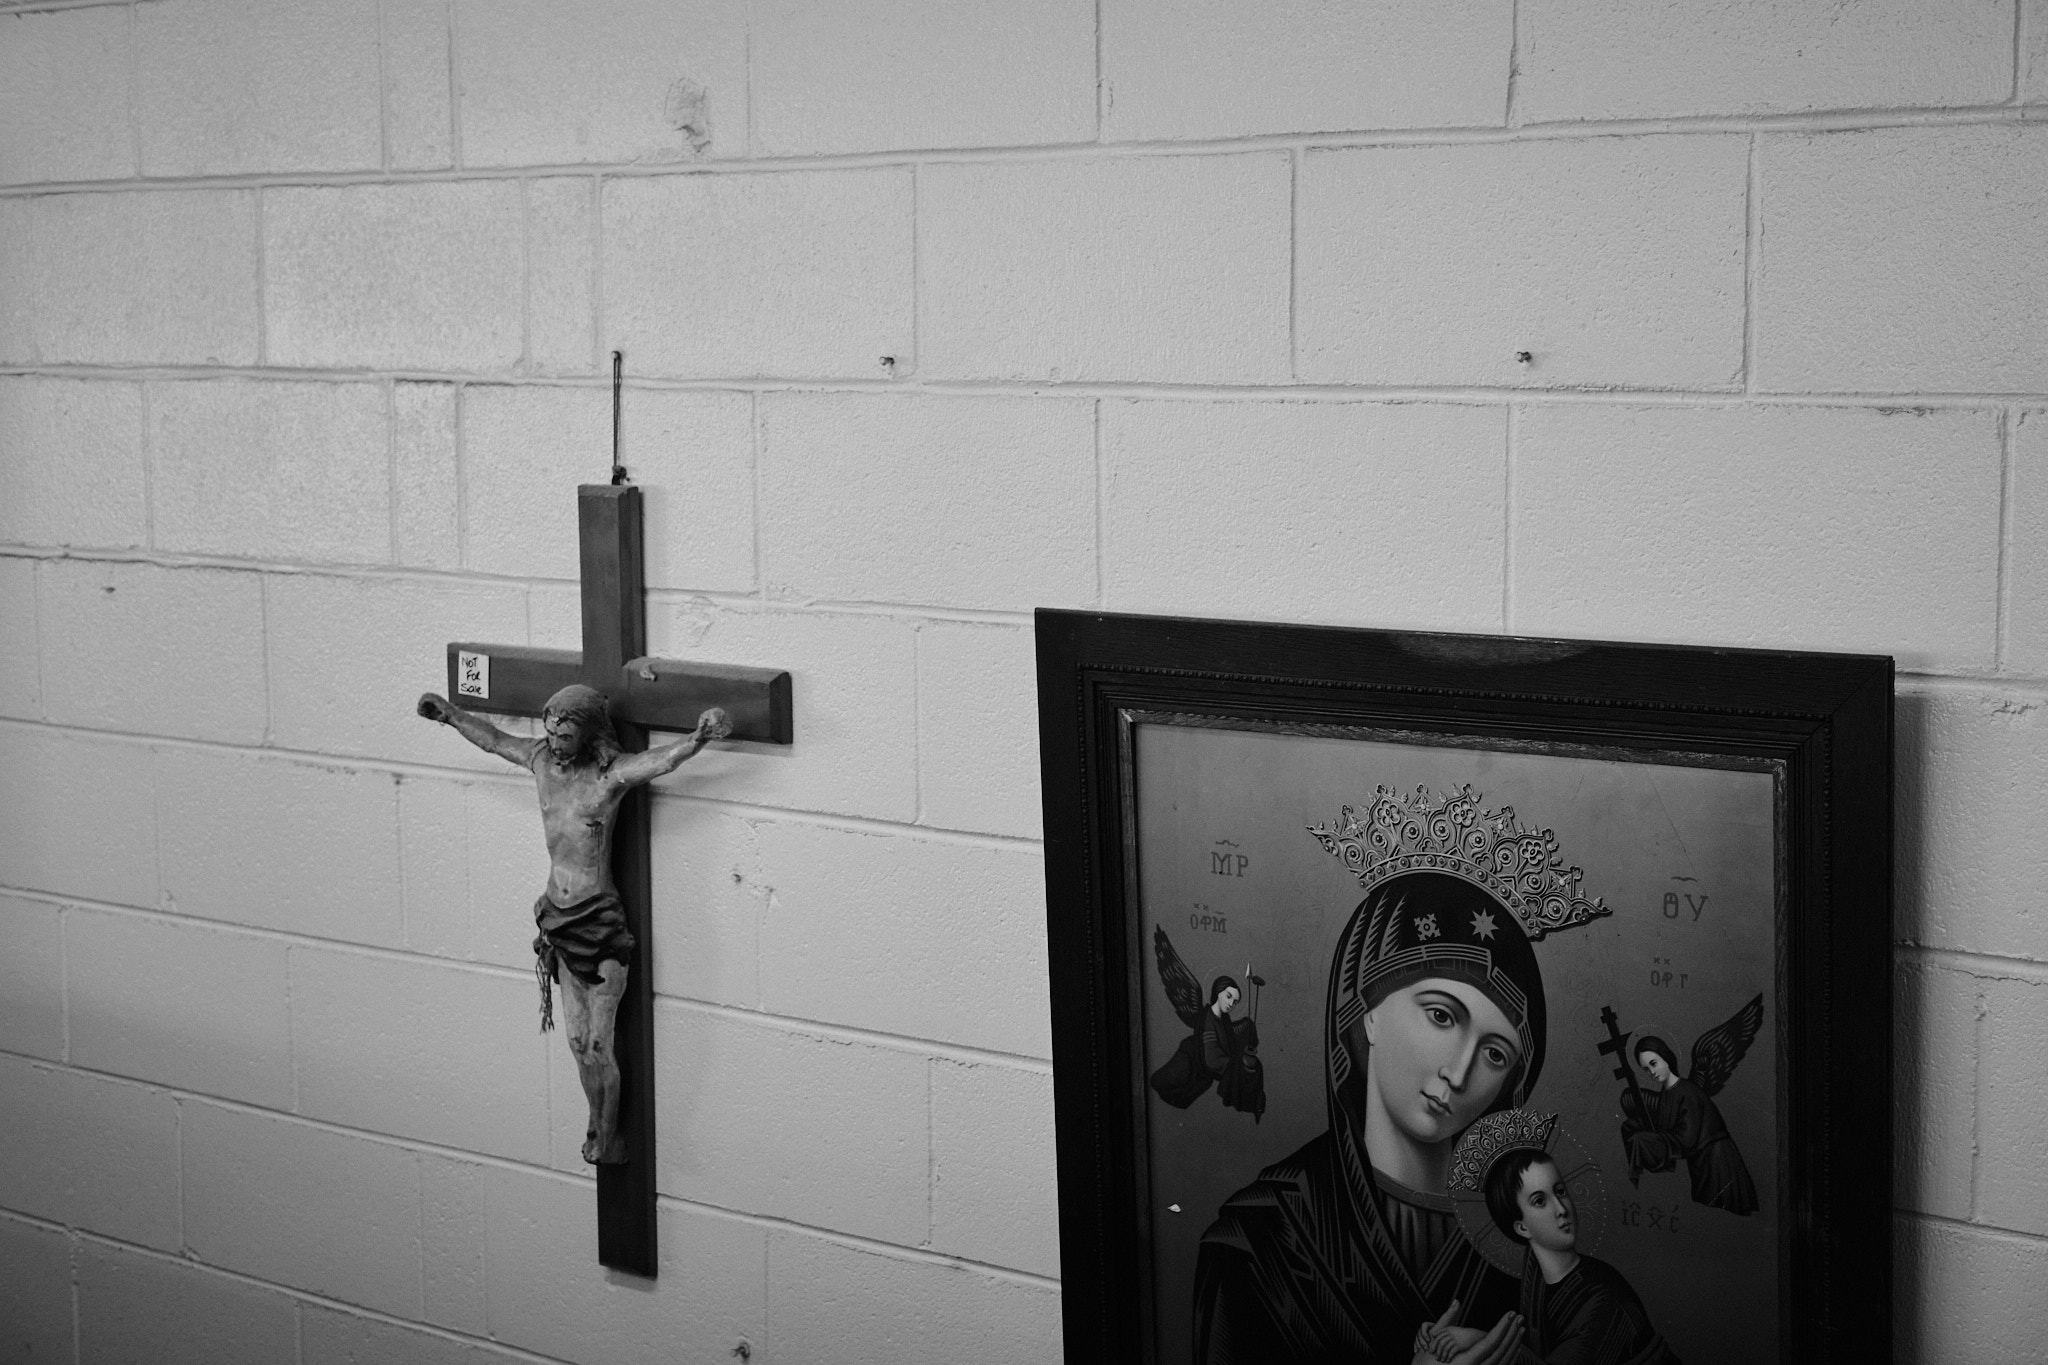 A statue of a crucified Jesus hangs on the wall beside a painting of the Virgin Mary. Upon the cross is a sticker that reads 'Not for sale'.